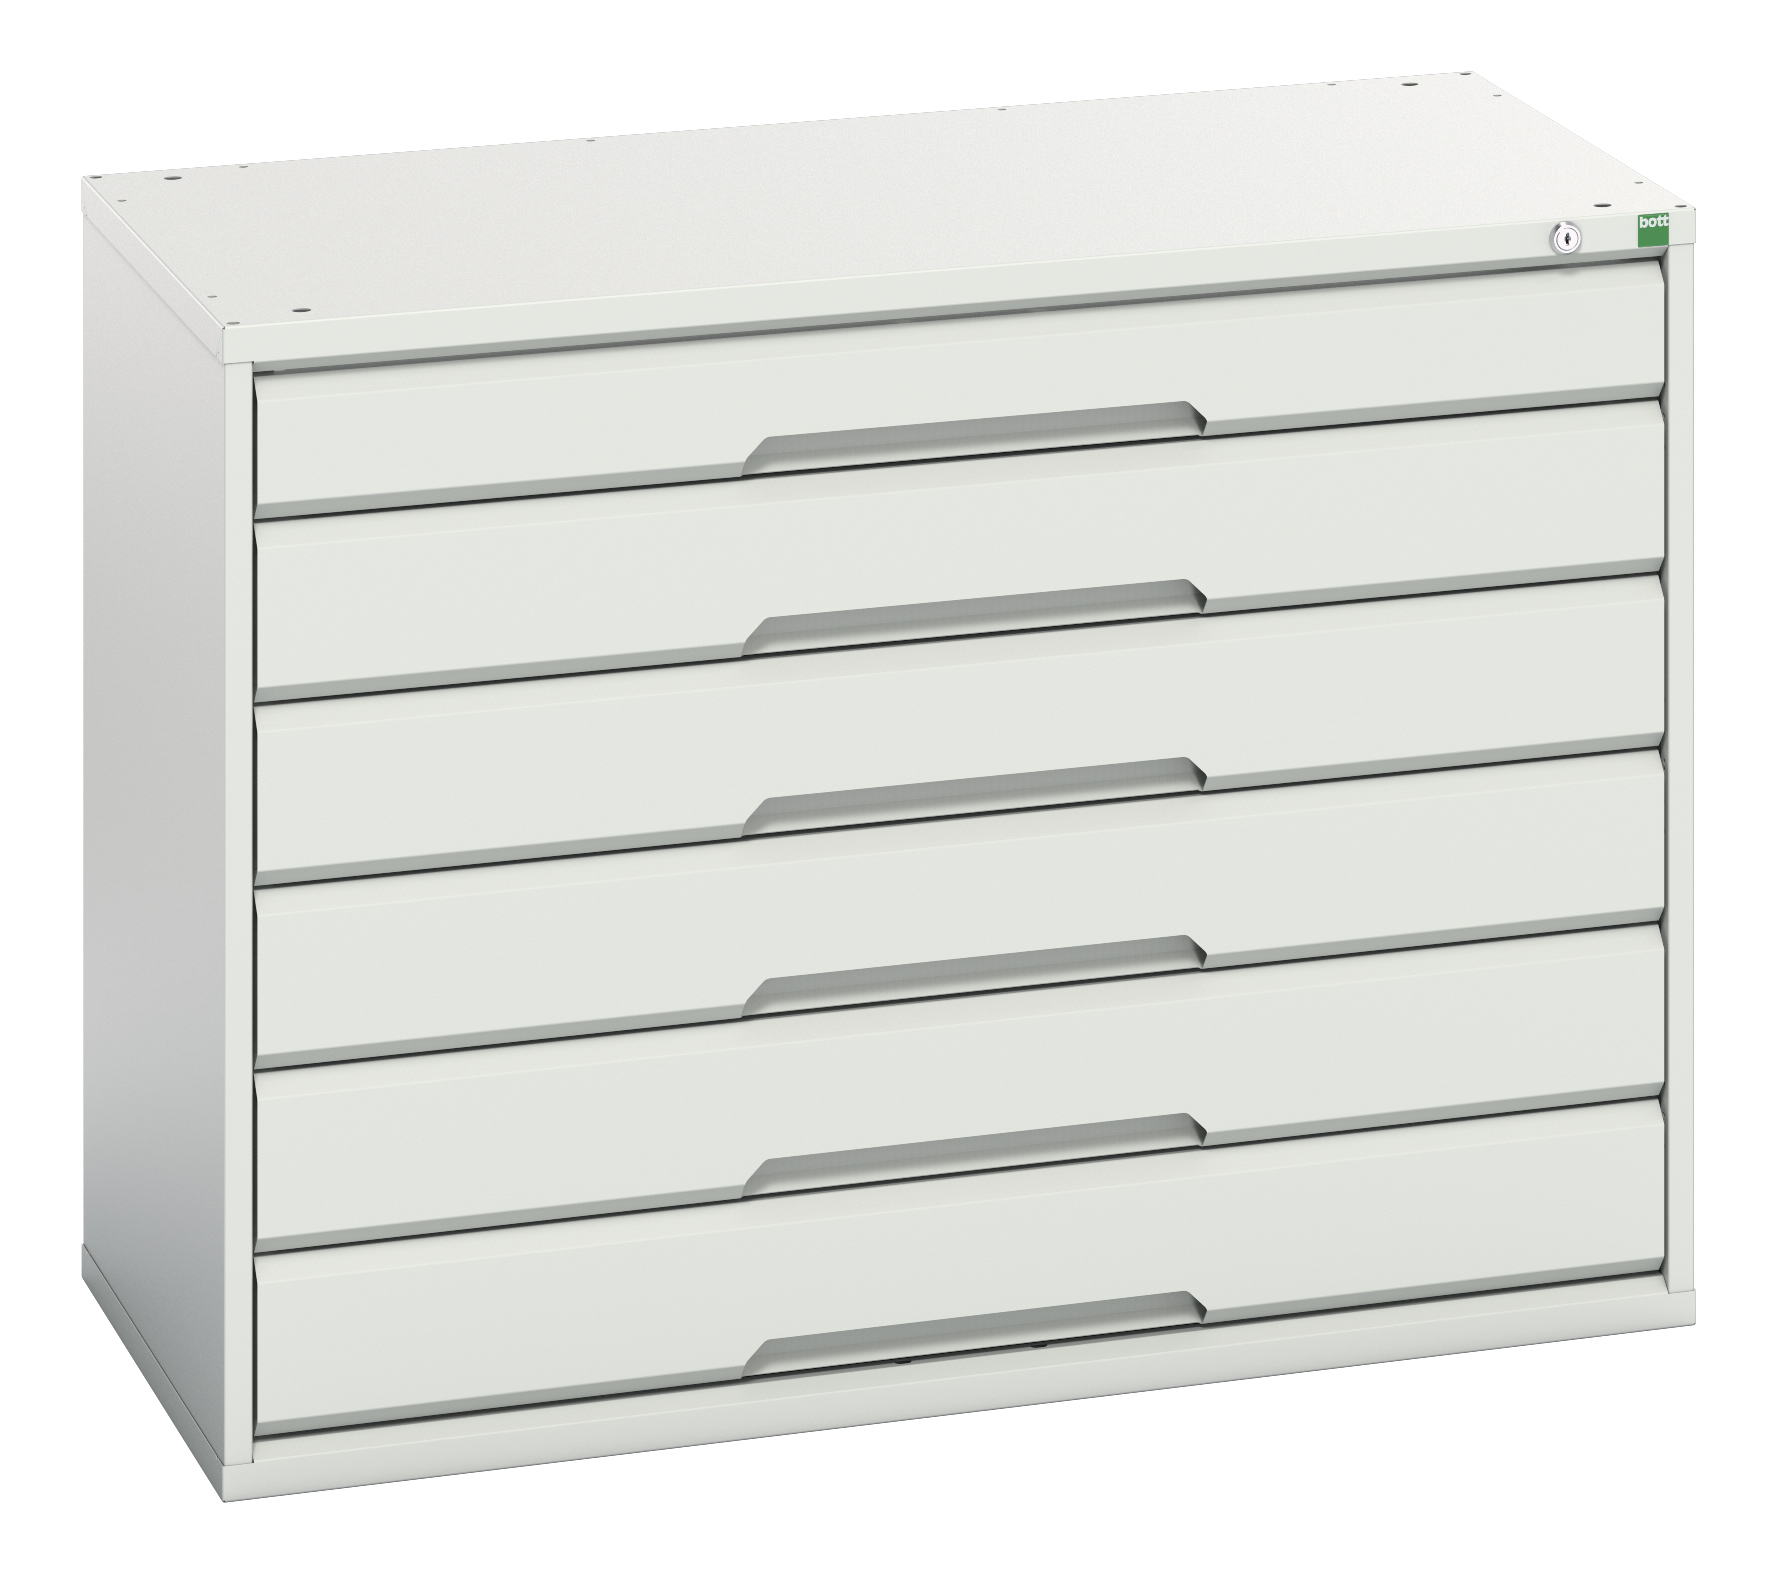 Bott Verso Drawer Cabinet With 6 Drawers - 16925214.16